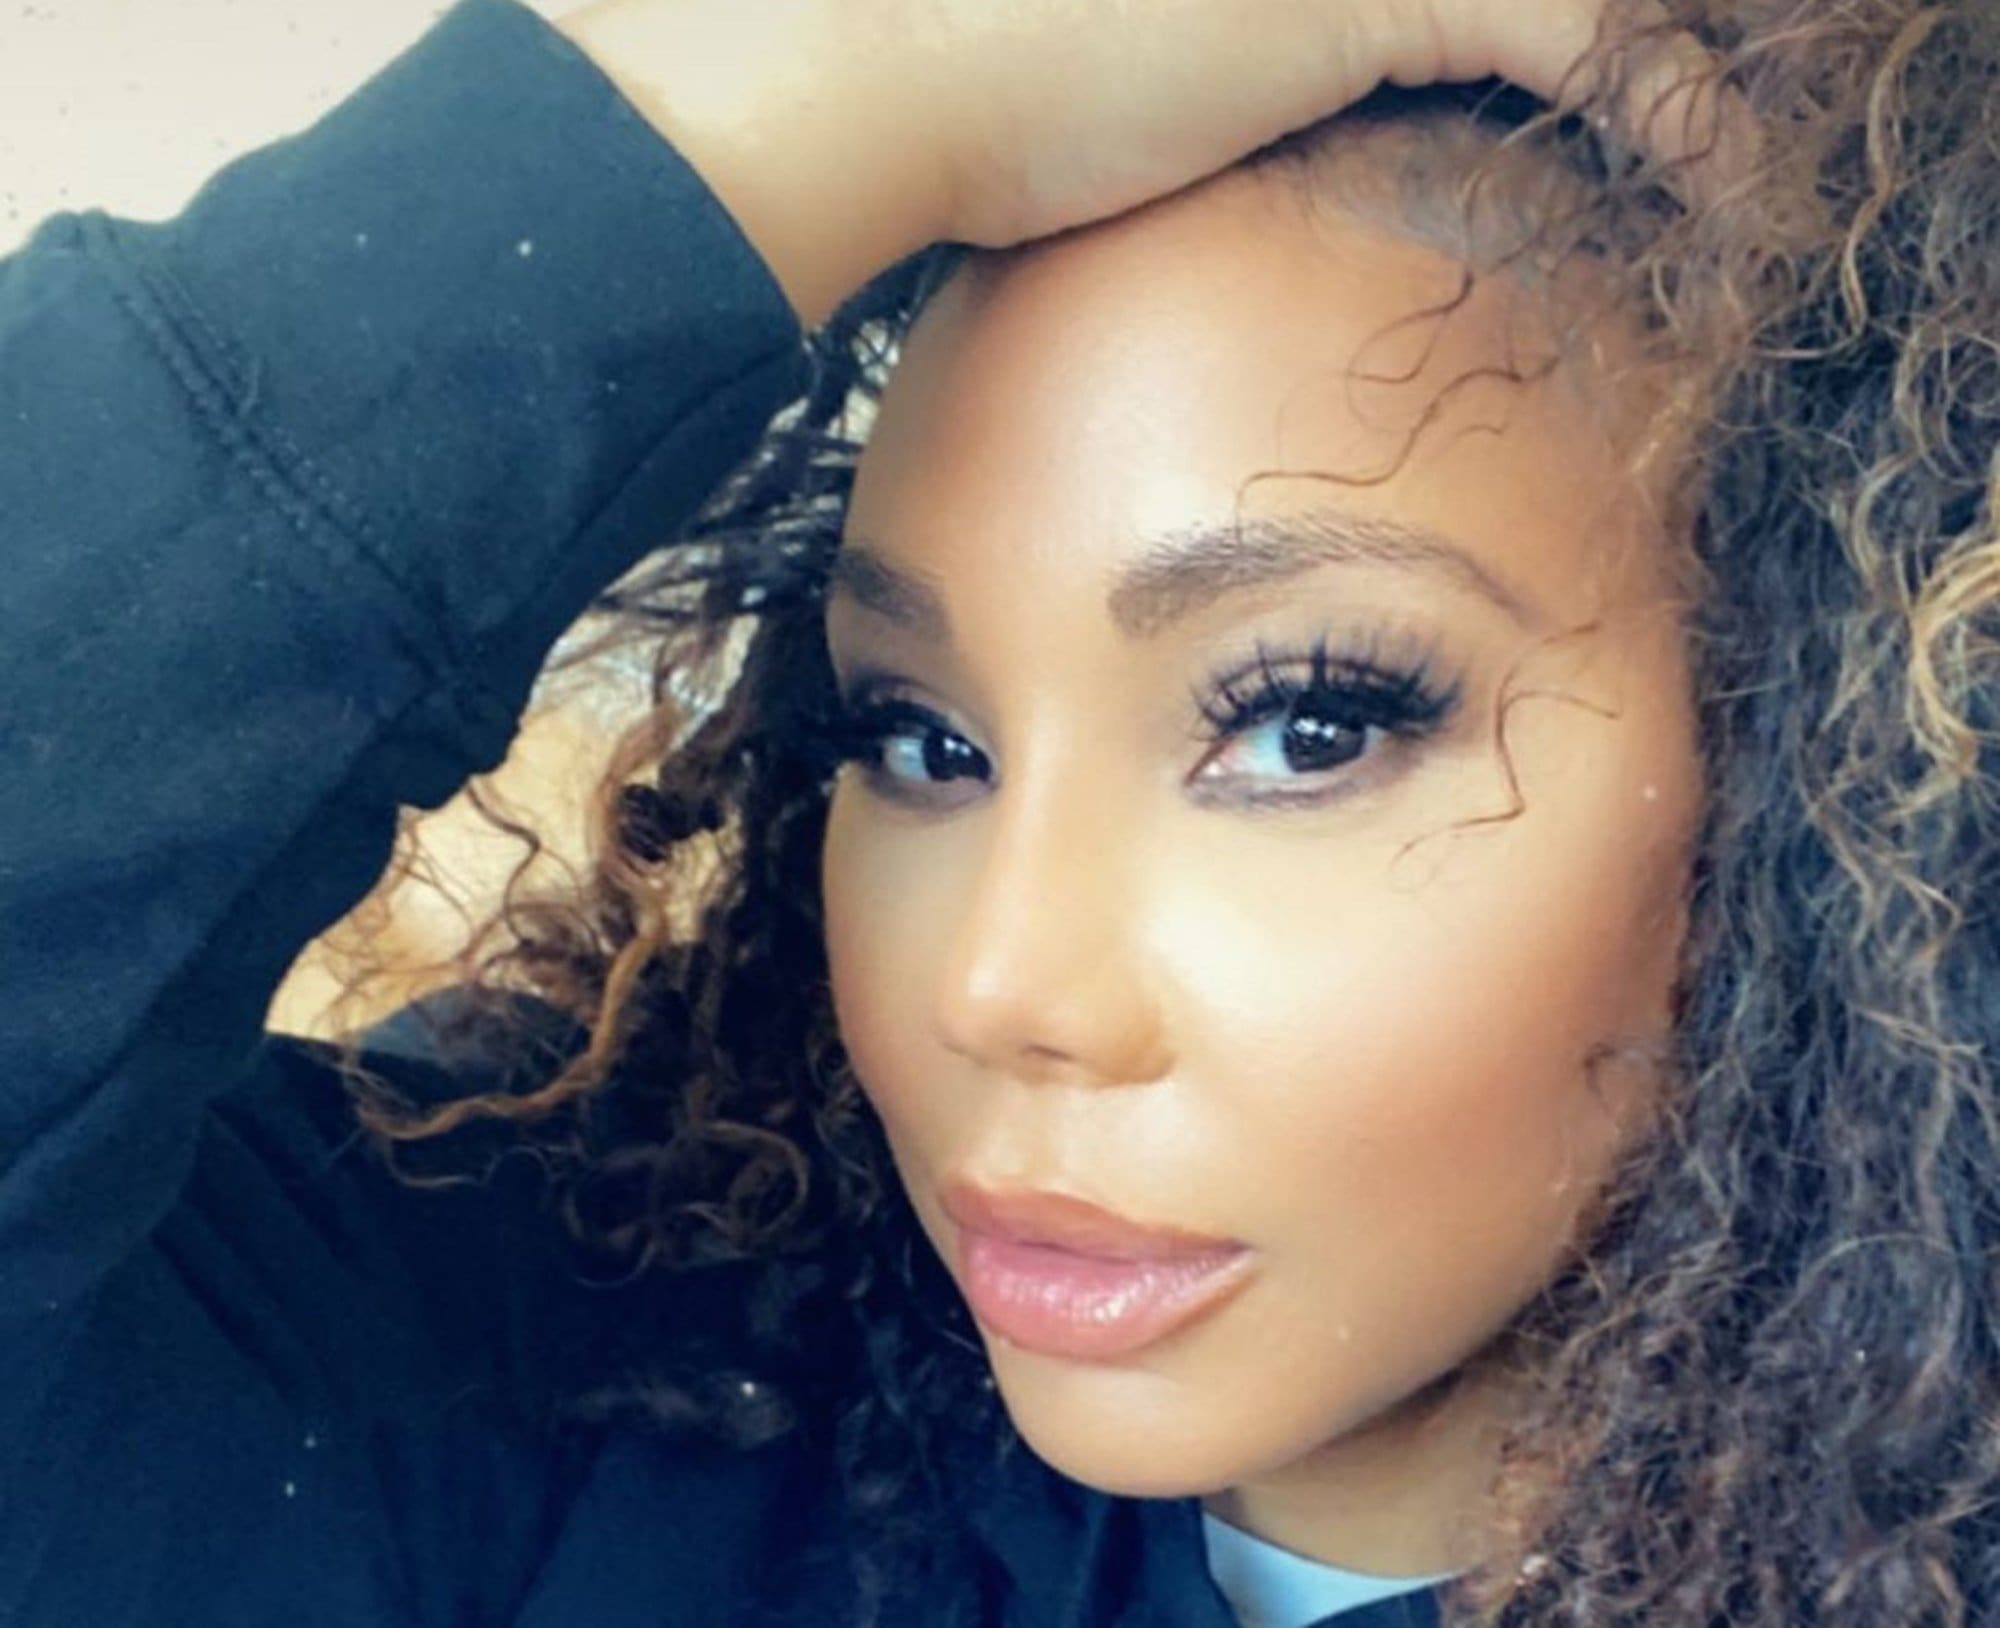 Tamar Braxton Looks Drop-Dead Gorgeous In This Video - See Her Sensual Moves